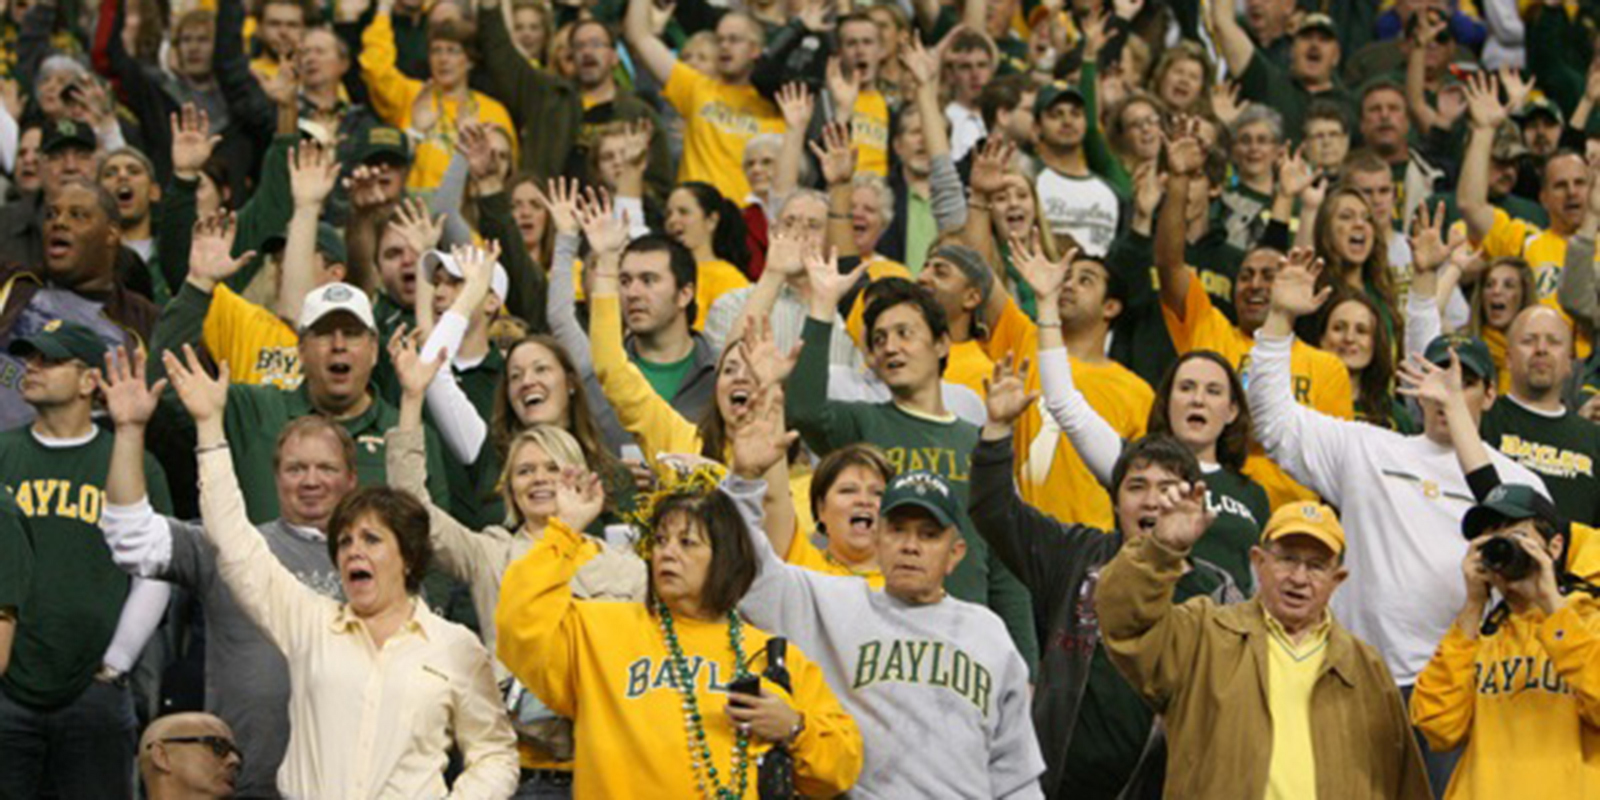 Baylor fans decked out in green and gold